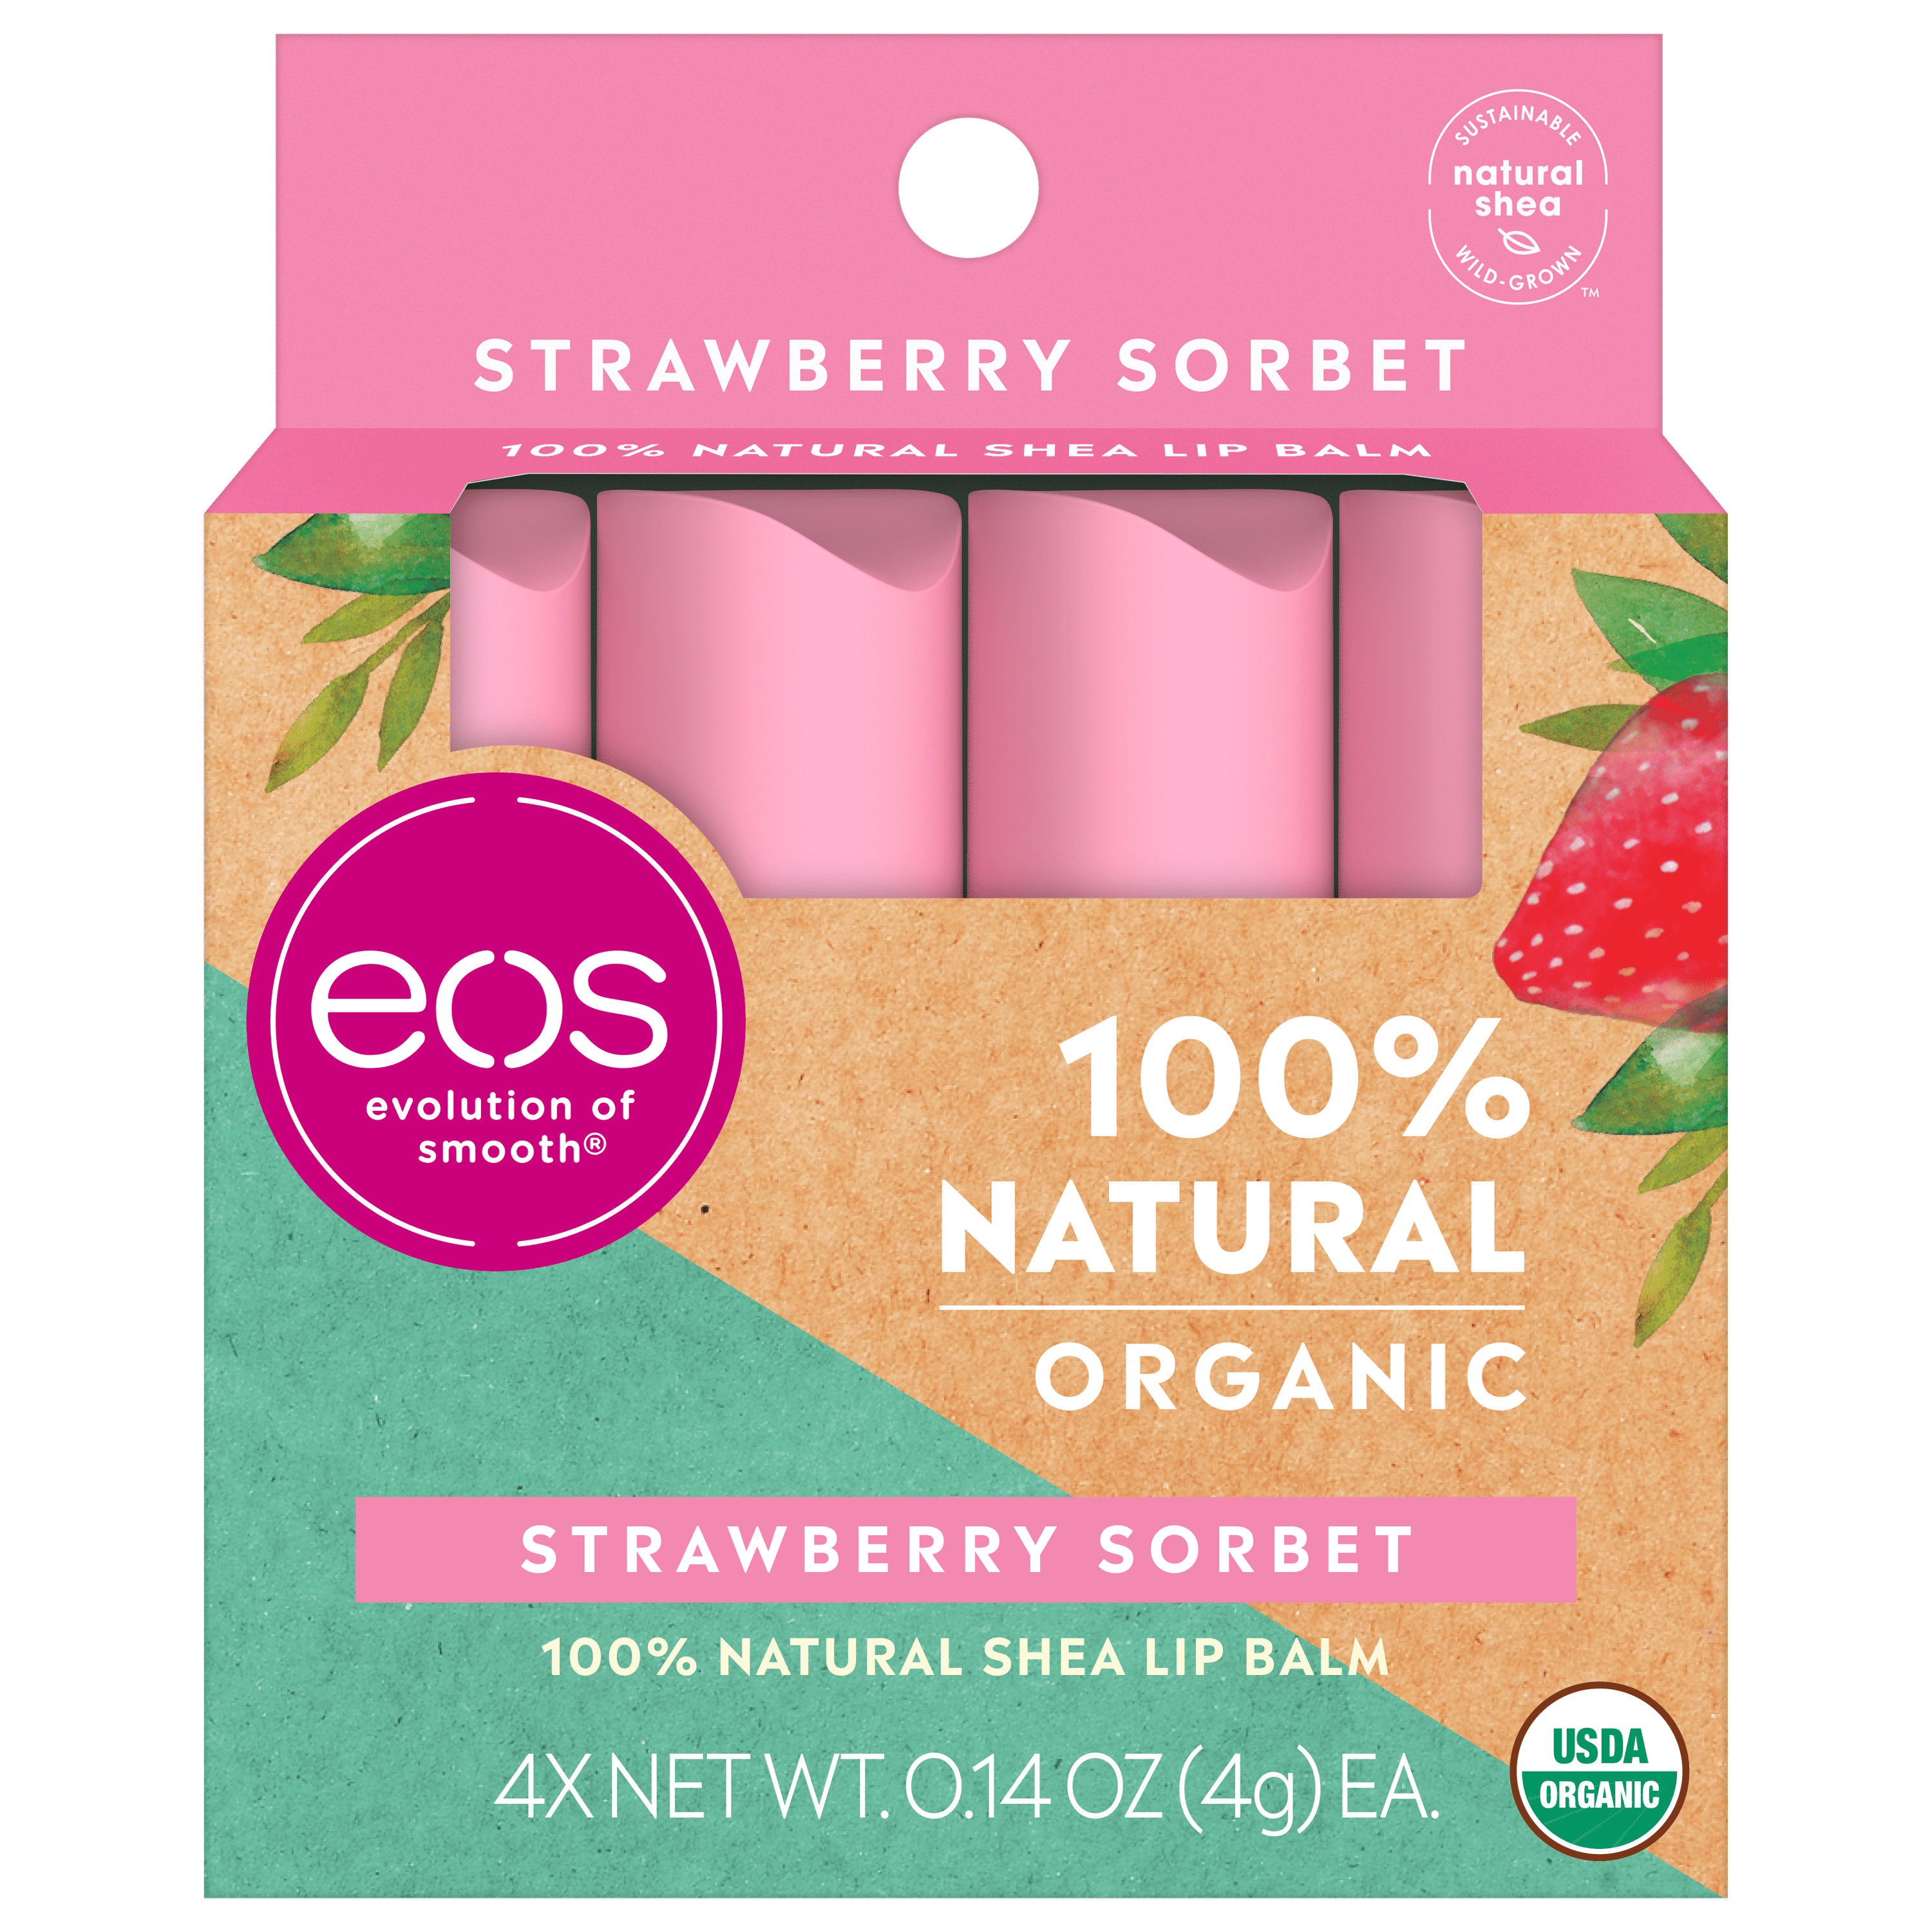 eos 100% Natural & Organic Lip Balm- Strawberry Sorbet, Dermatologist  Recommended for Sensitive Skin, All-Day Moisture, 0.14 oz, 2 Pack